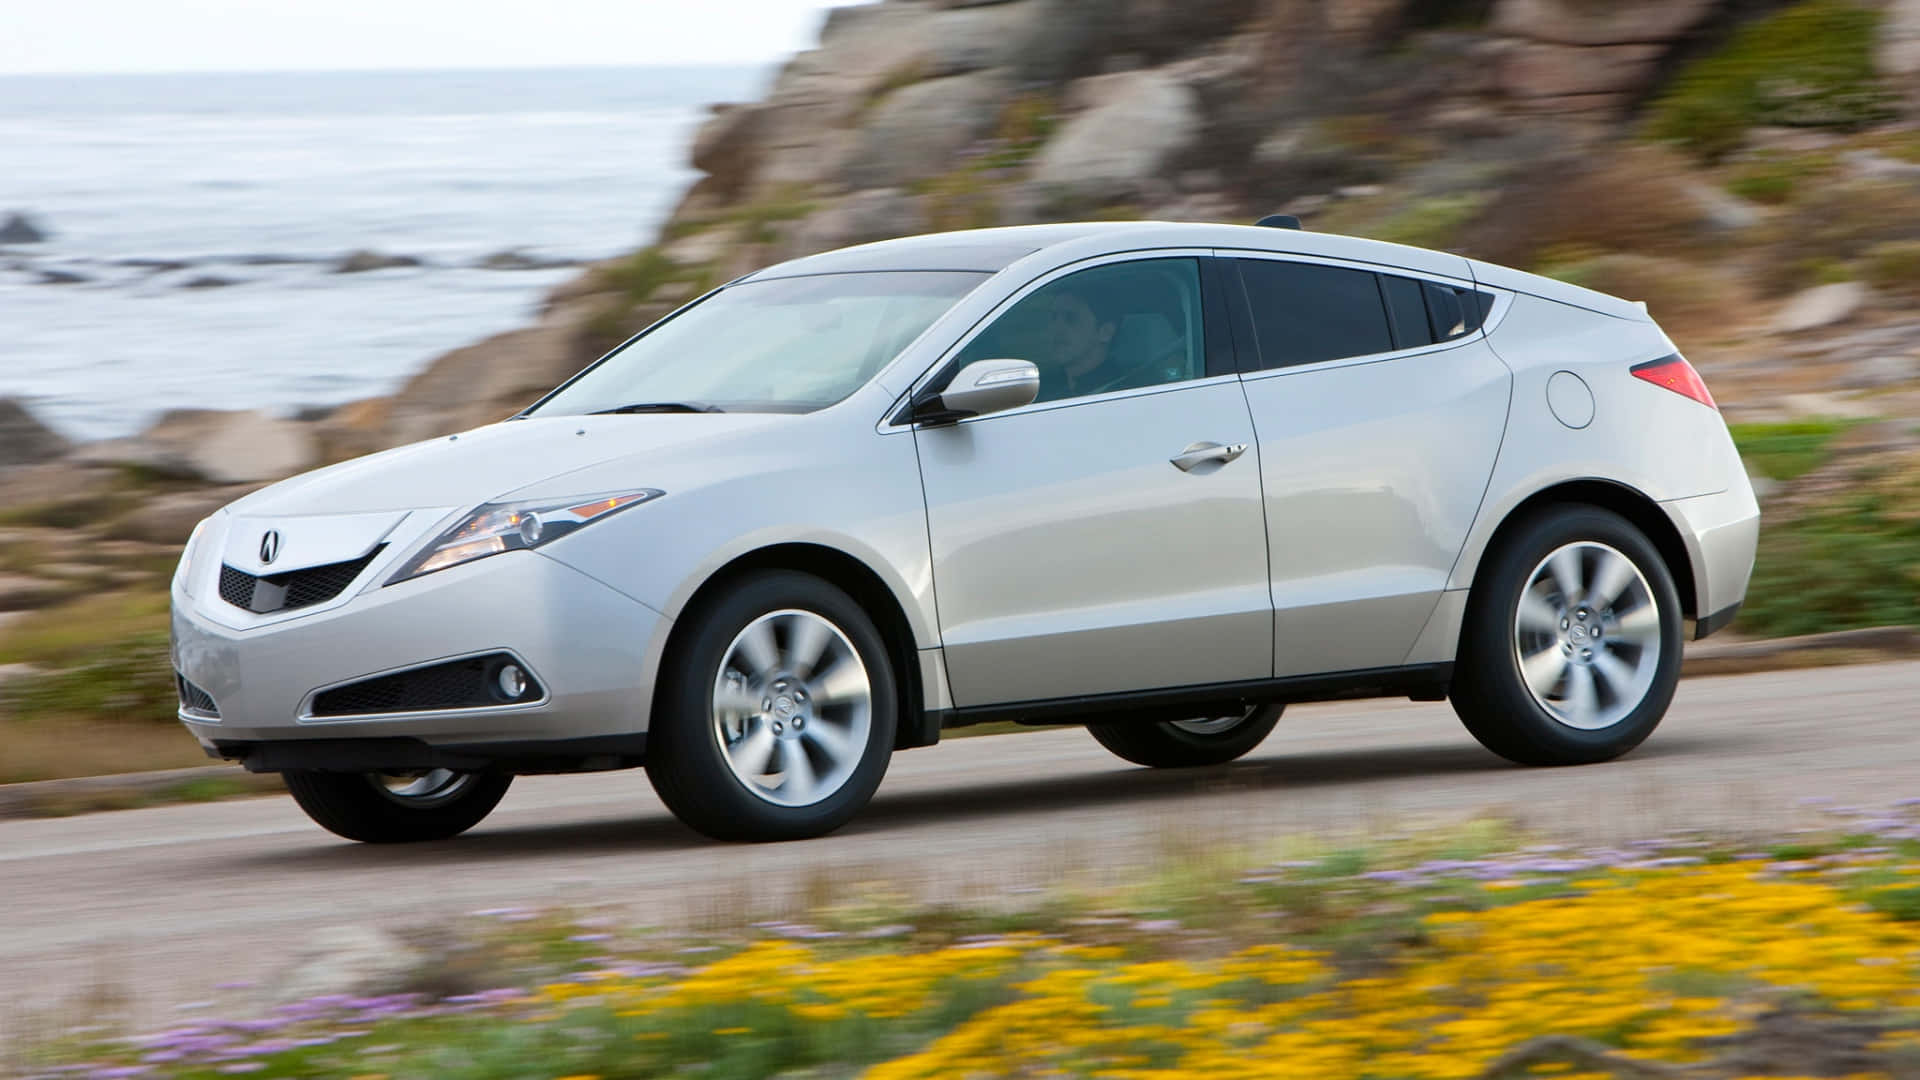 Acura ZDX in Stunning Silver - Premium Crossover Vehicle Wallpaper